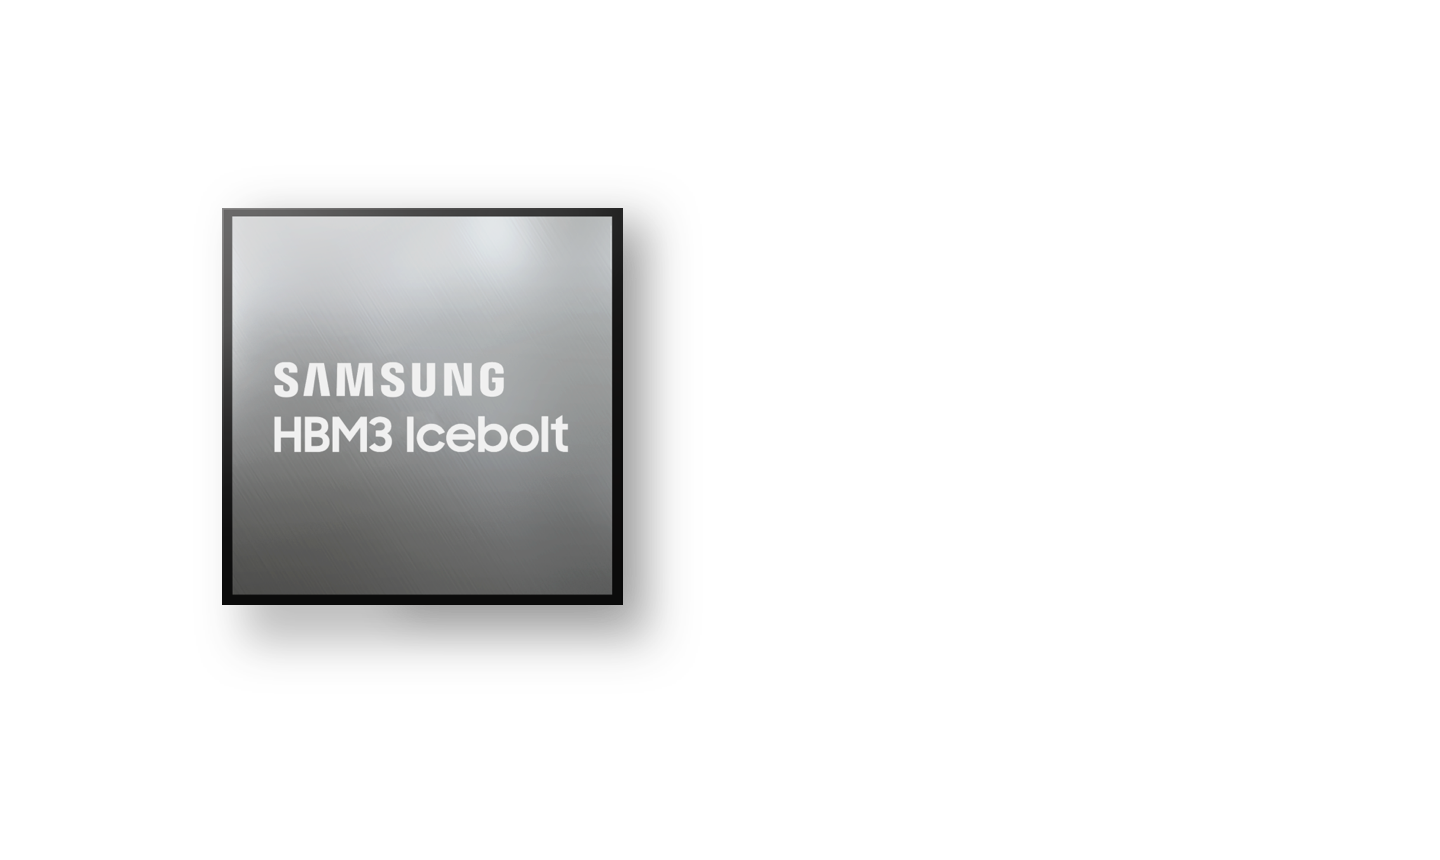 Samsung HBM against an image of an AI robot and neural network.